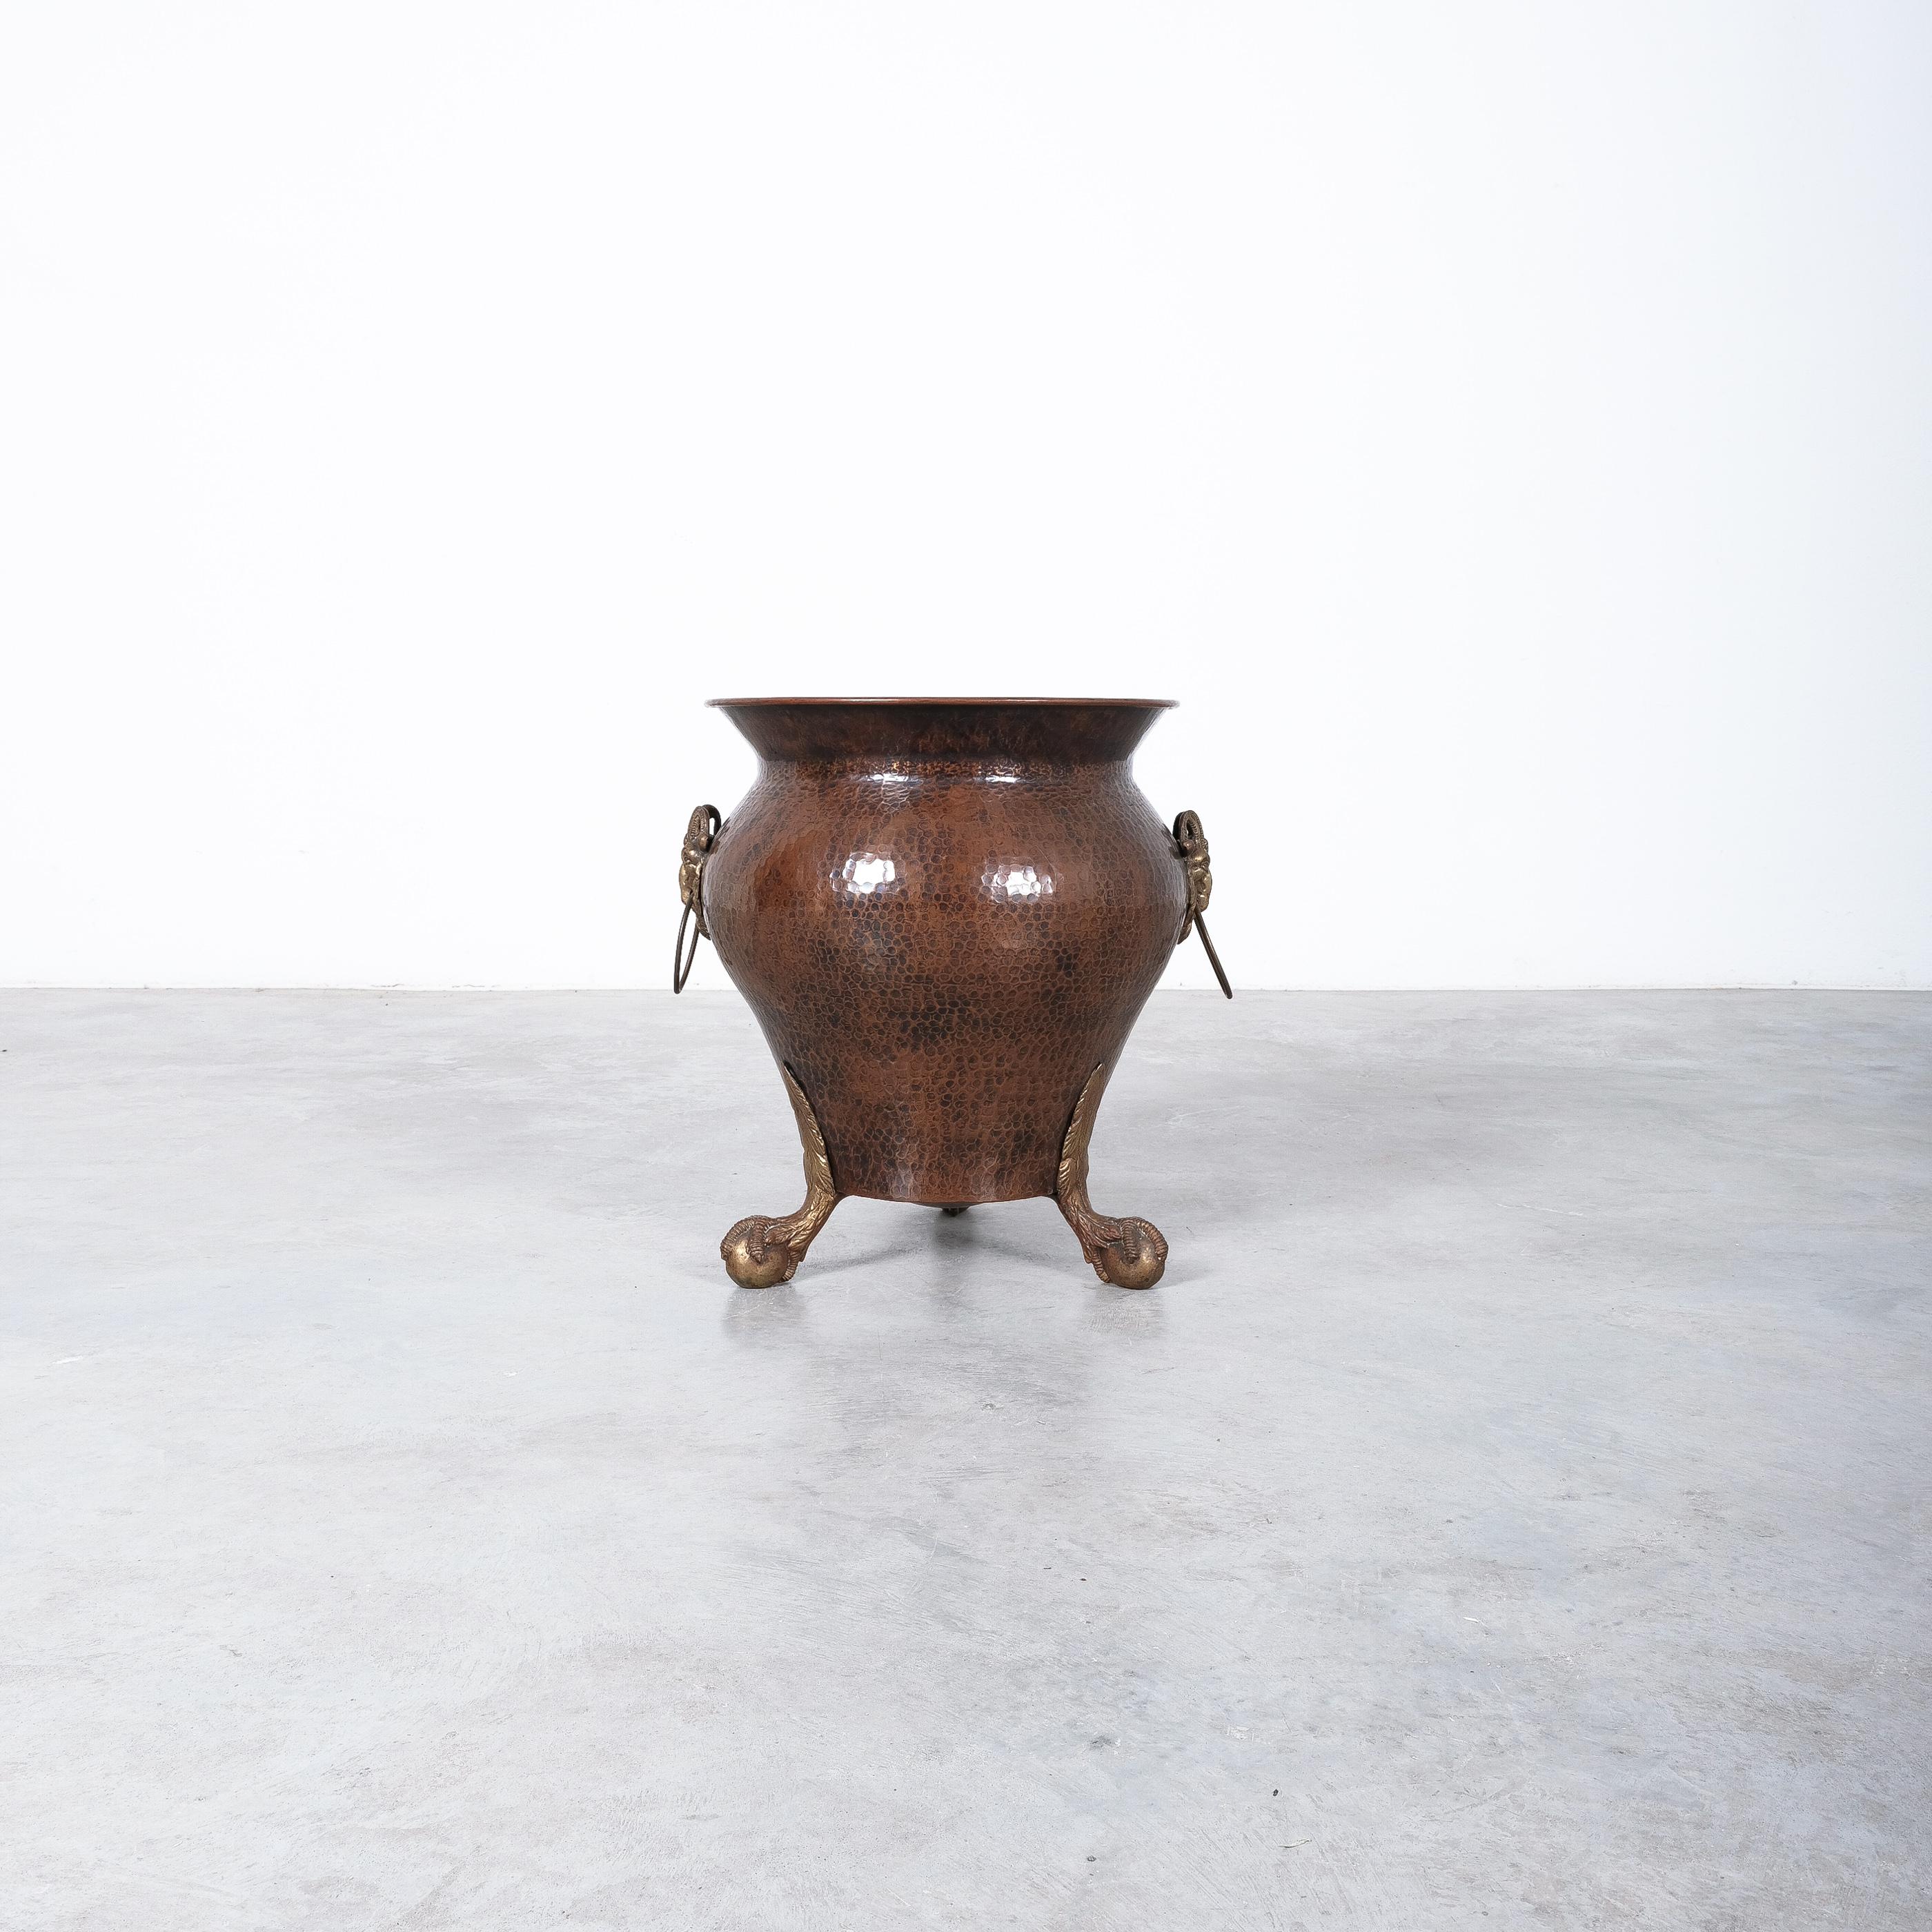 Maudoux Dinant (labelled) large hammered copper & brass planter, Belgium mid-century modern

Extravagant large artisan pot or planter handmade from hammered copper with cast brass details. Whether you're an interior designer, collector of vintage